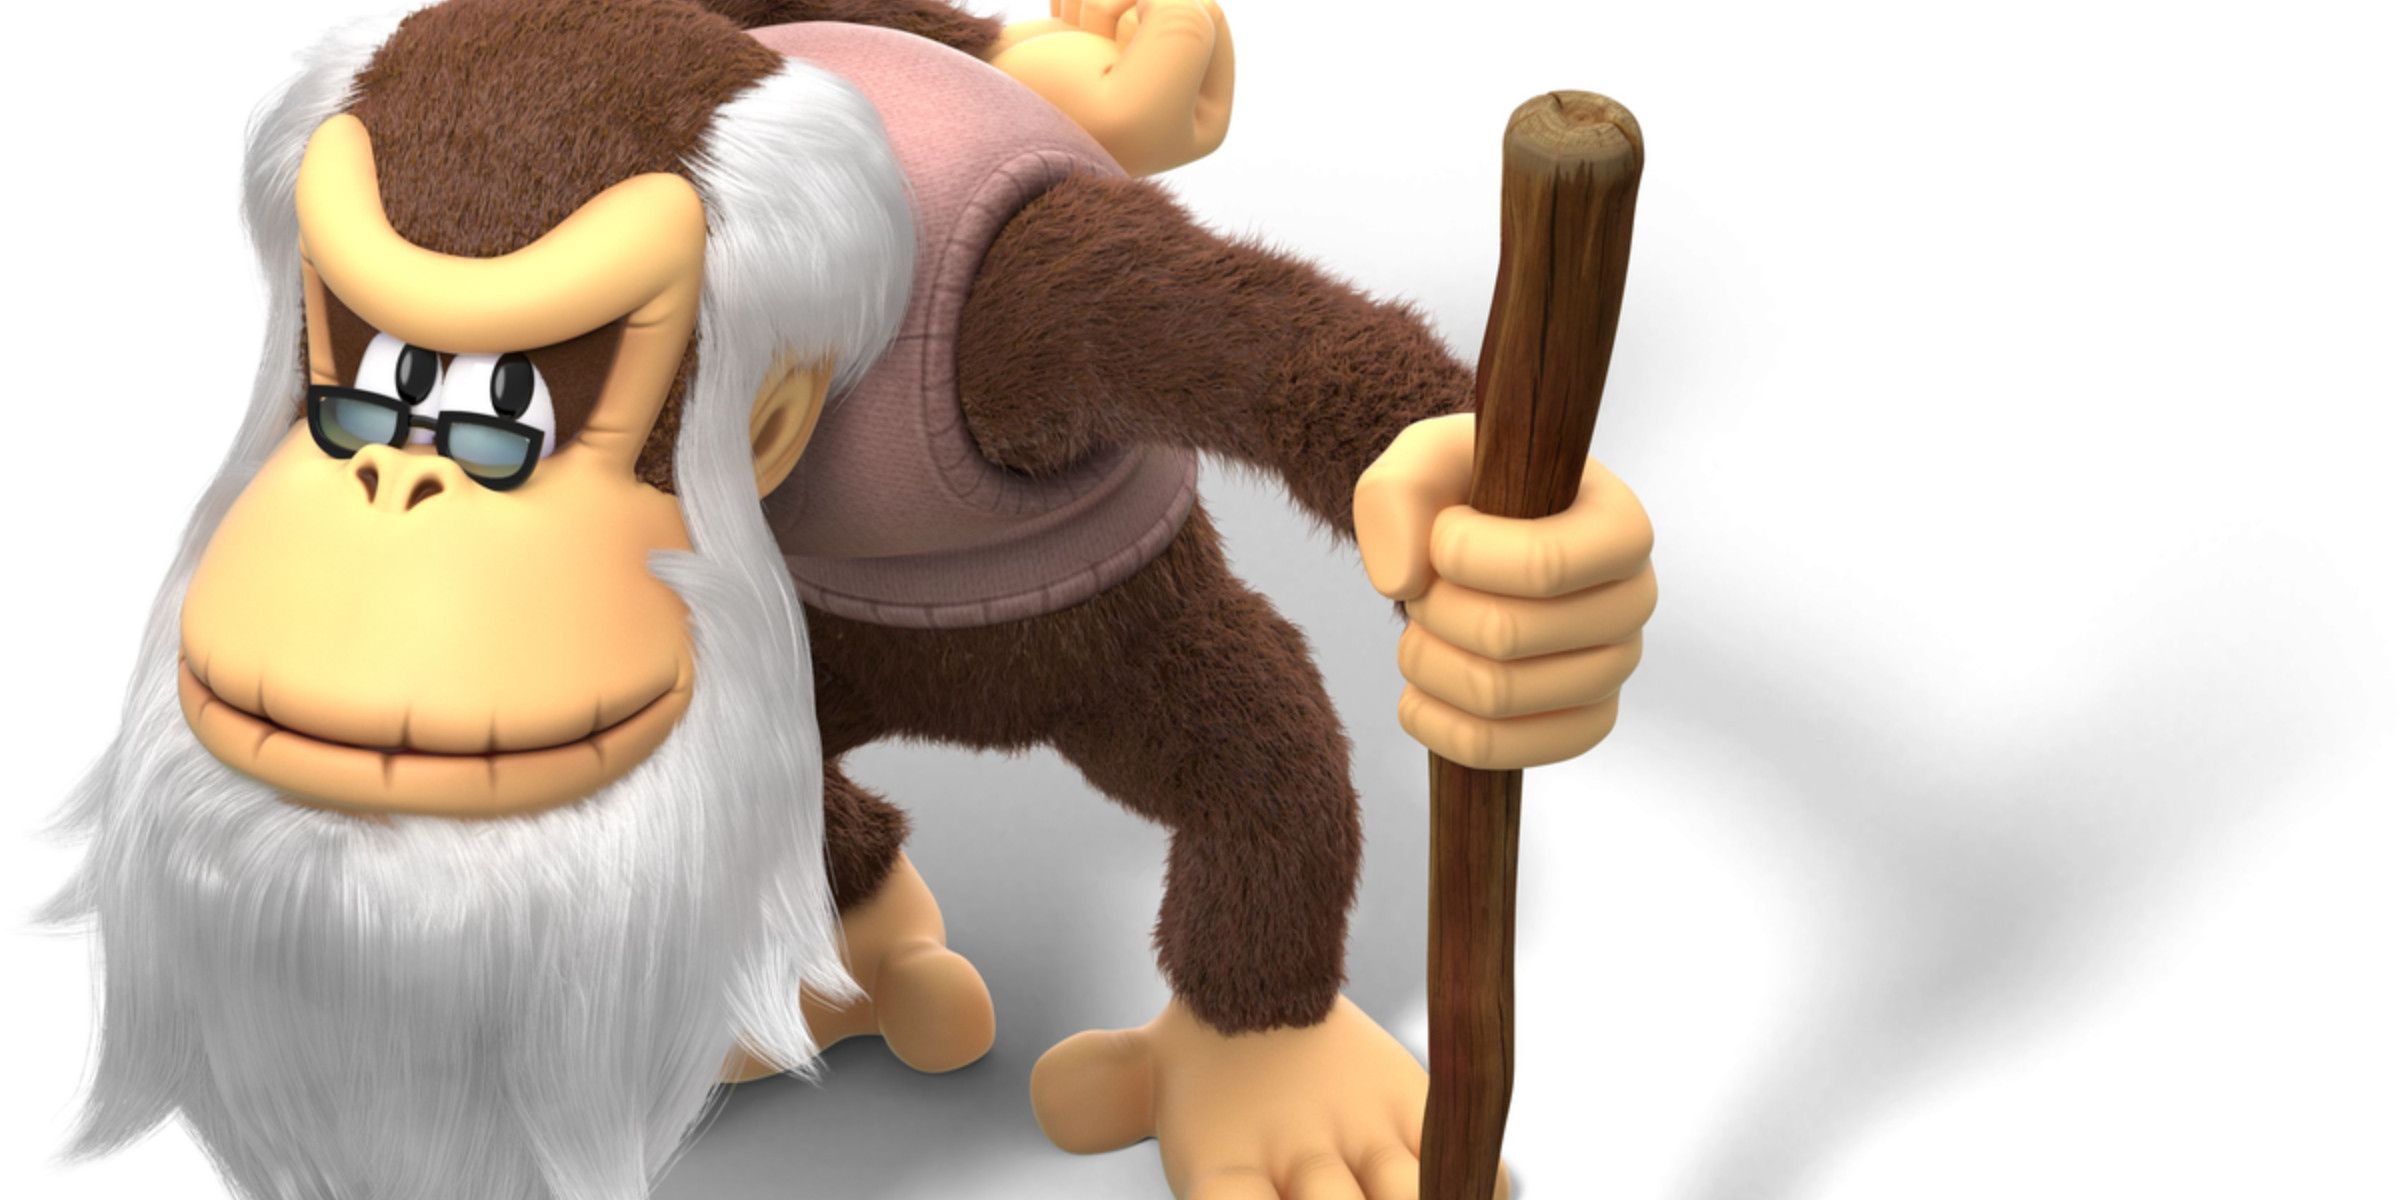 Crankey Kong in a sweater vest, glasses and walking stick